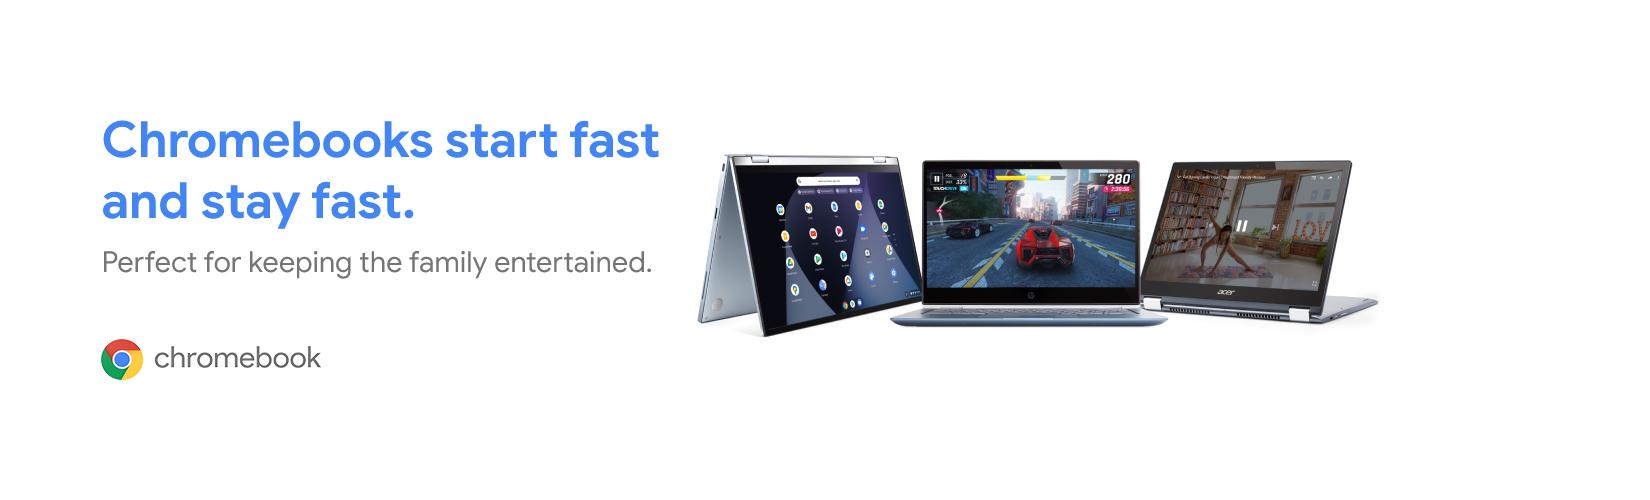 Chromebooks start fast and stay fast. Perfect for keeping the family entertained.